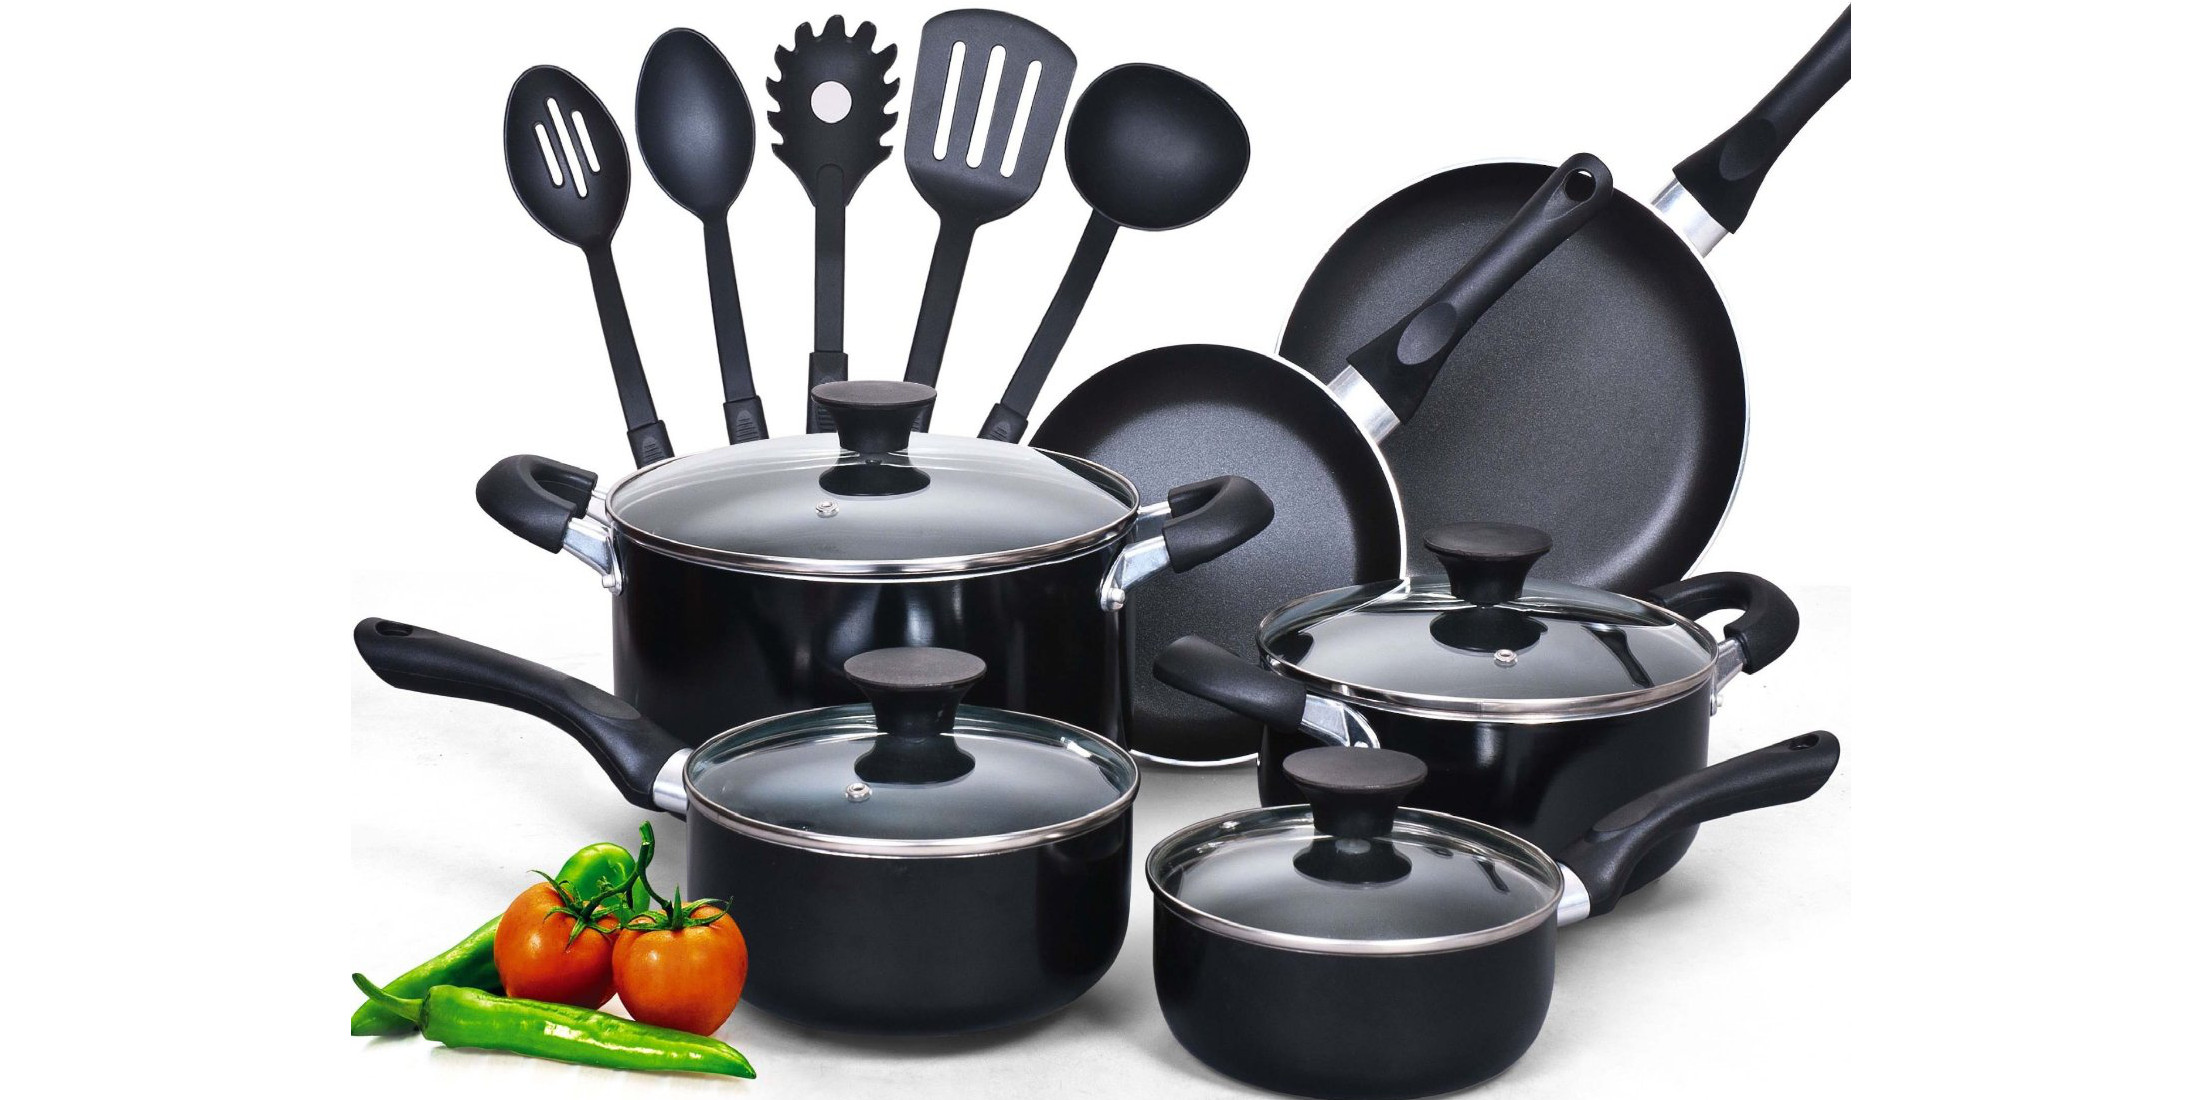 https://9to5toys.com/wp-content/uploads/sites/5/2015/12/cook-n-home-15-piece-non-stick-black-soft-handle-cookware-set-01.jpg